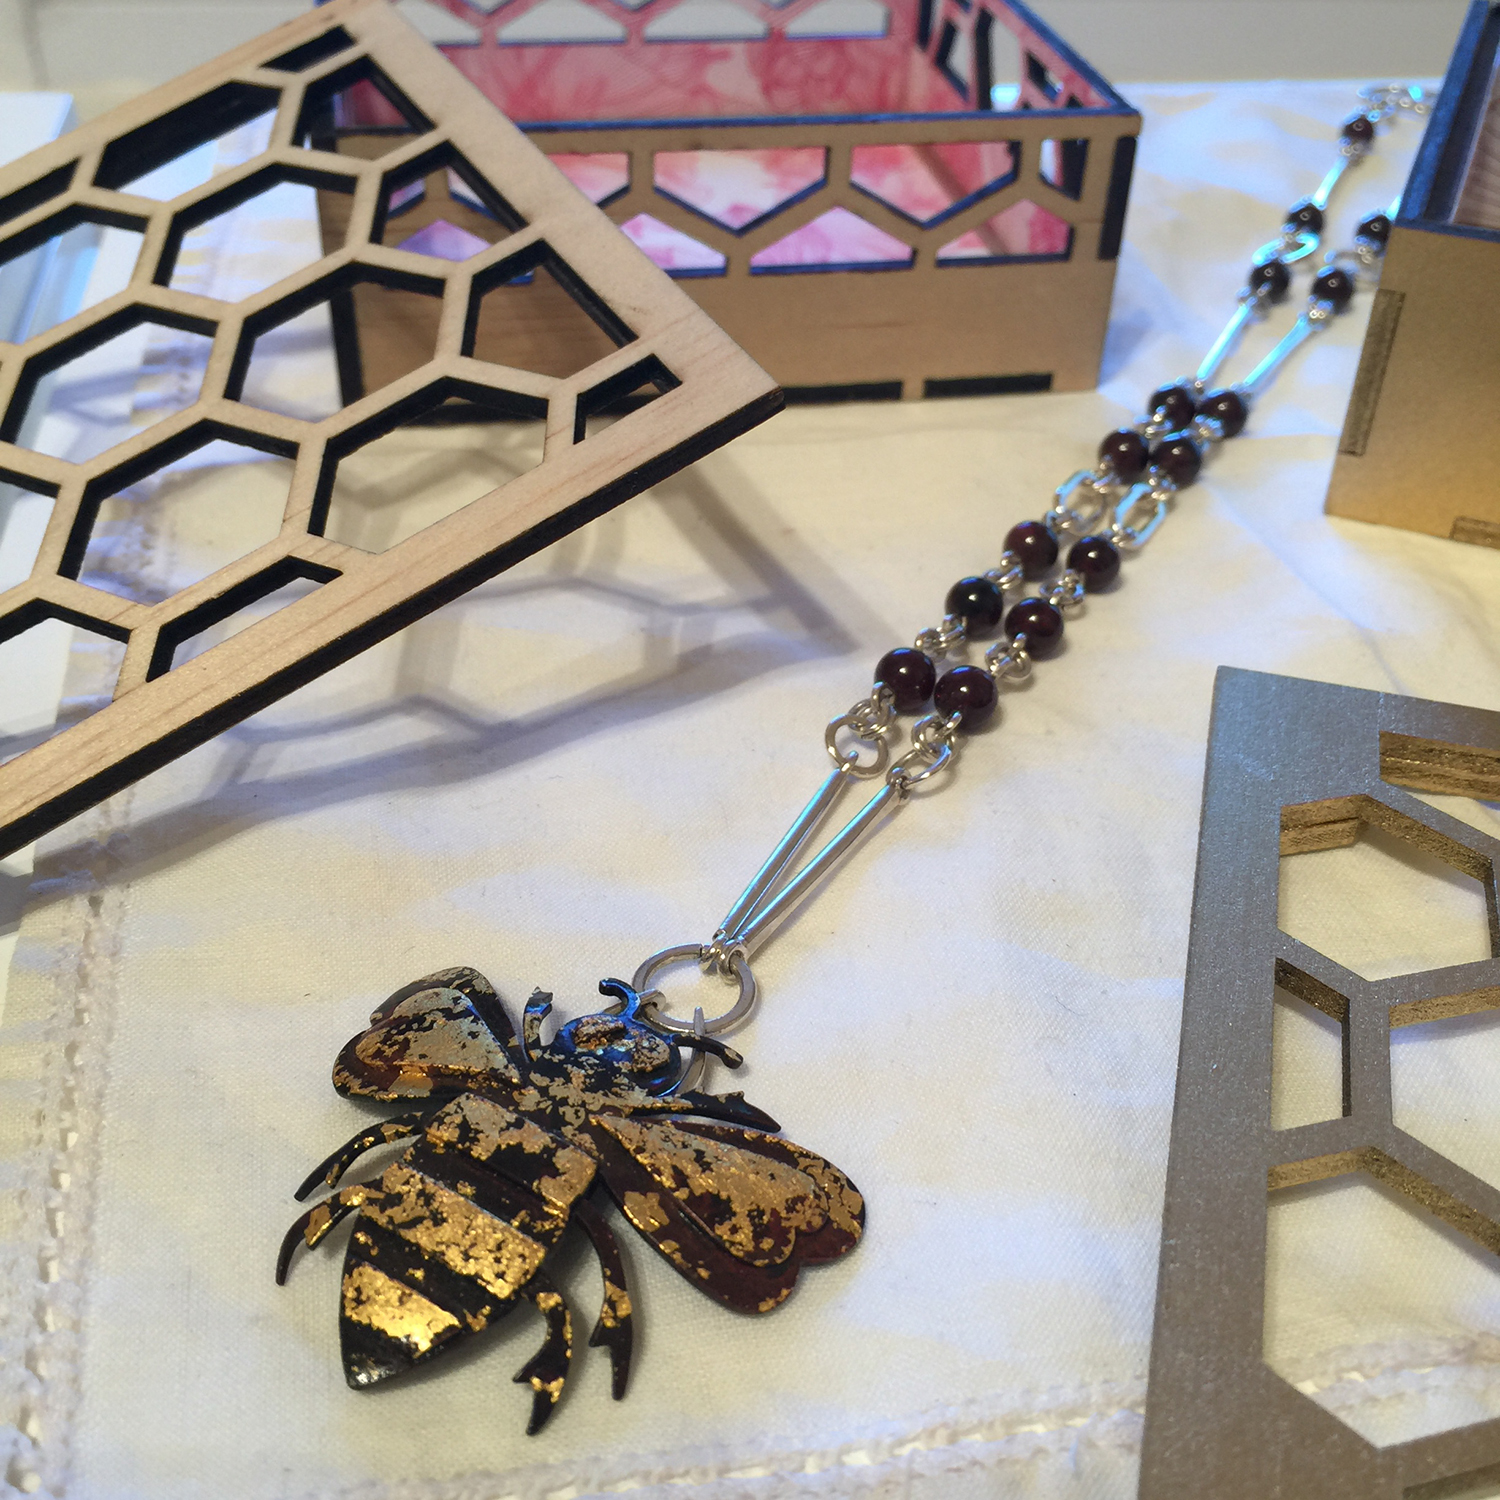 Kerry Youde - Laser Cut Box and Bee Necklace